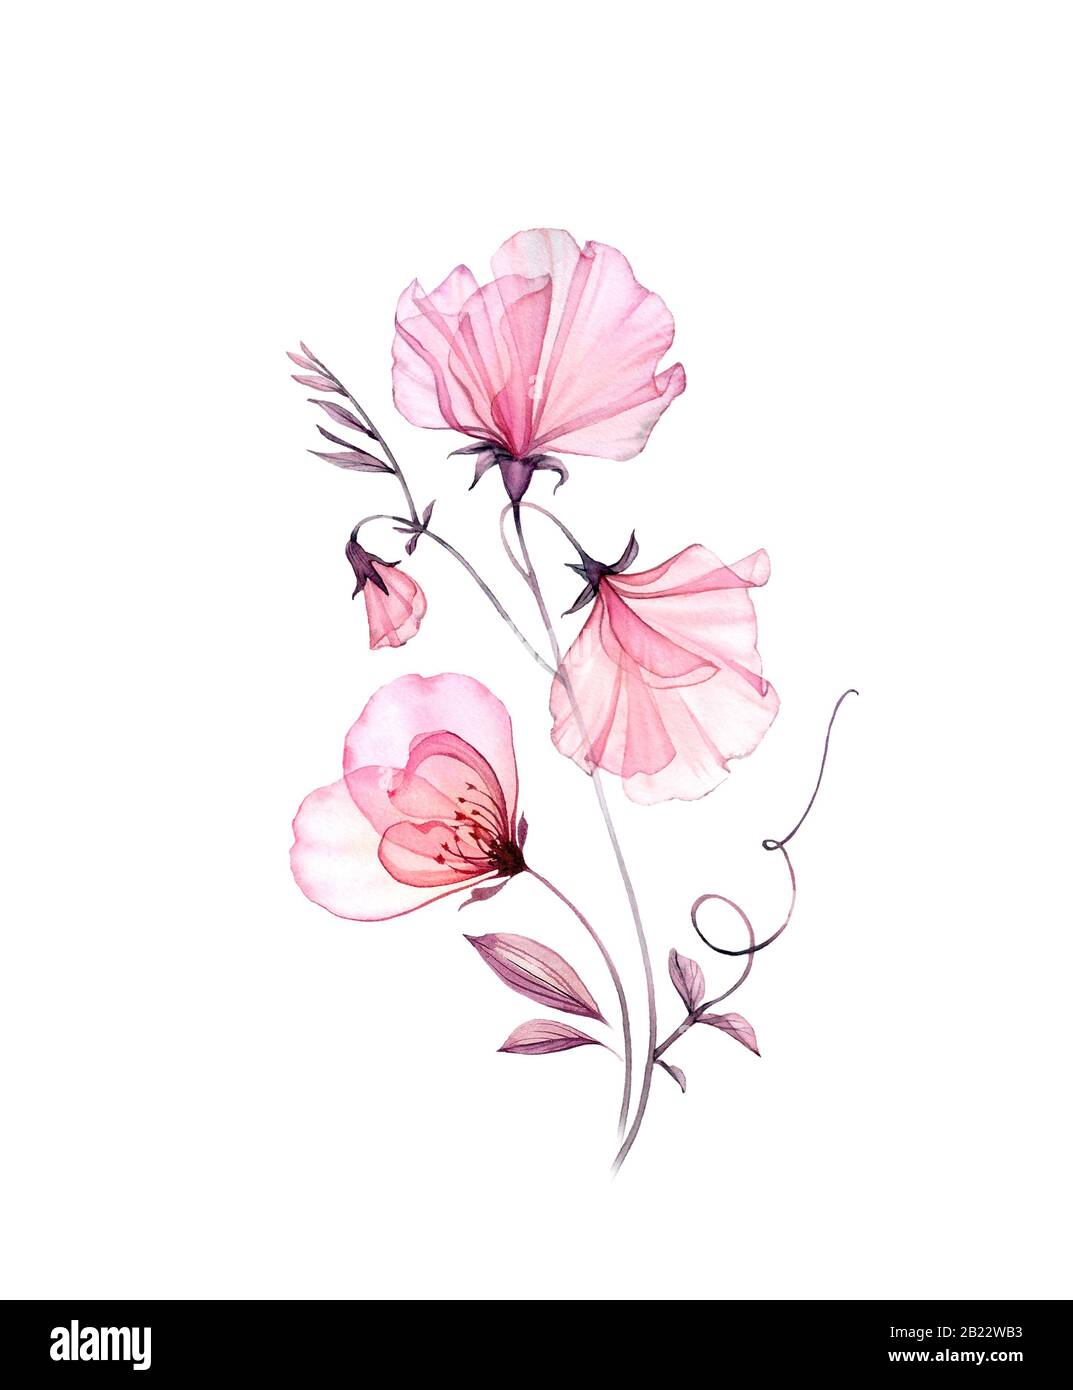 Watercolor floral composition. Sweet pea plant with rose flower. Artwork isolated on white. Botanical hand painted illustration for wedding Stock Photo